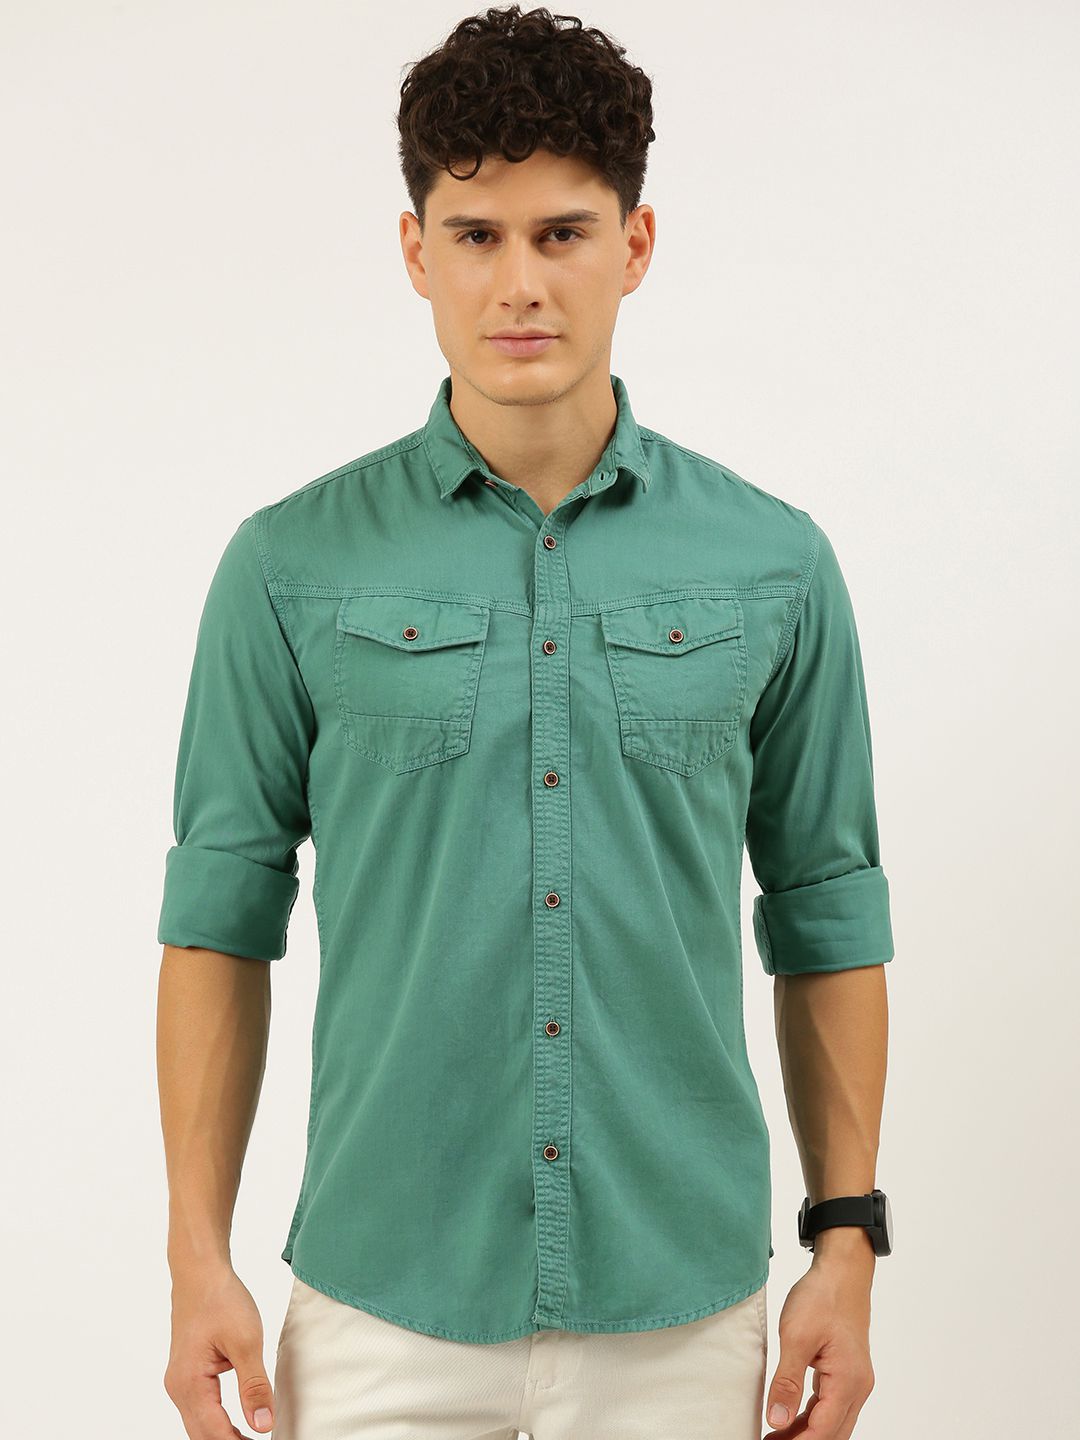     			IVOC - Teal 100% Cotton Slim Fit Men's Casual Shirt ( Pack of 1 )